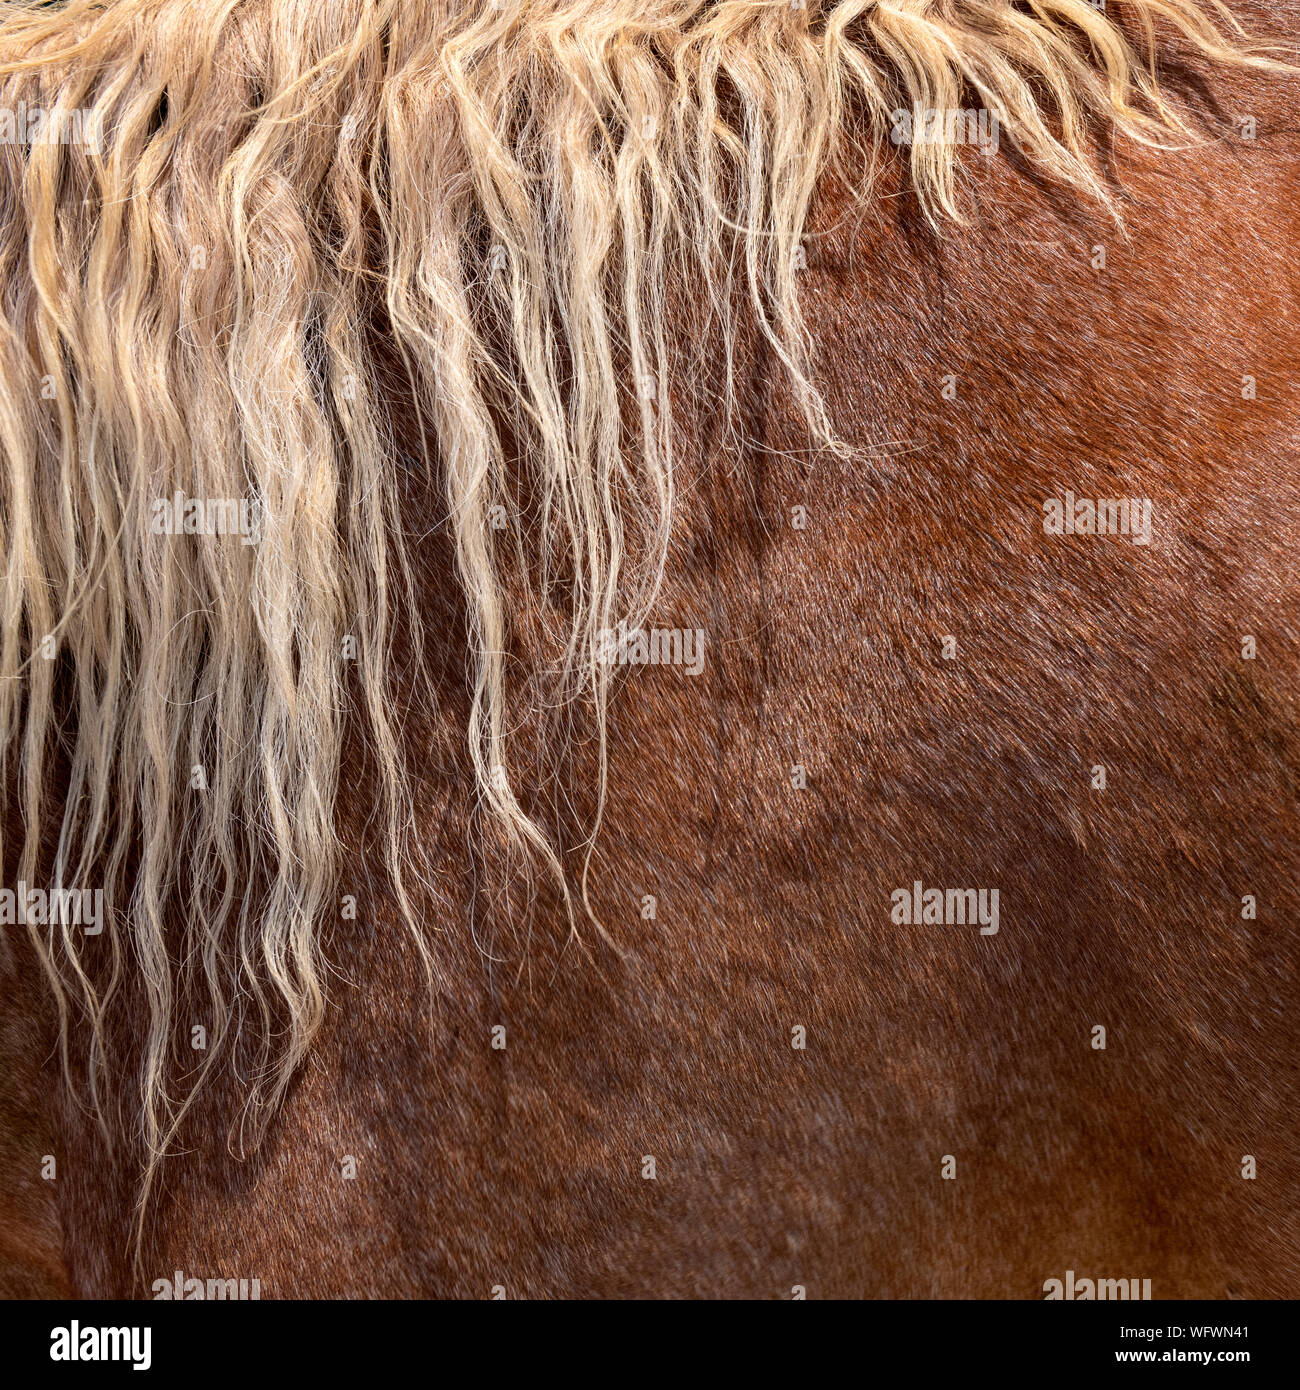 Brown horse skin, hair, or fur pattern texture background. Stock Photo